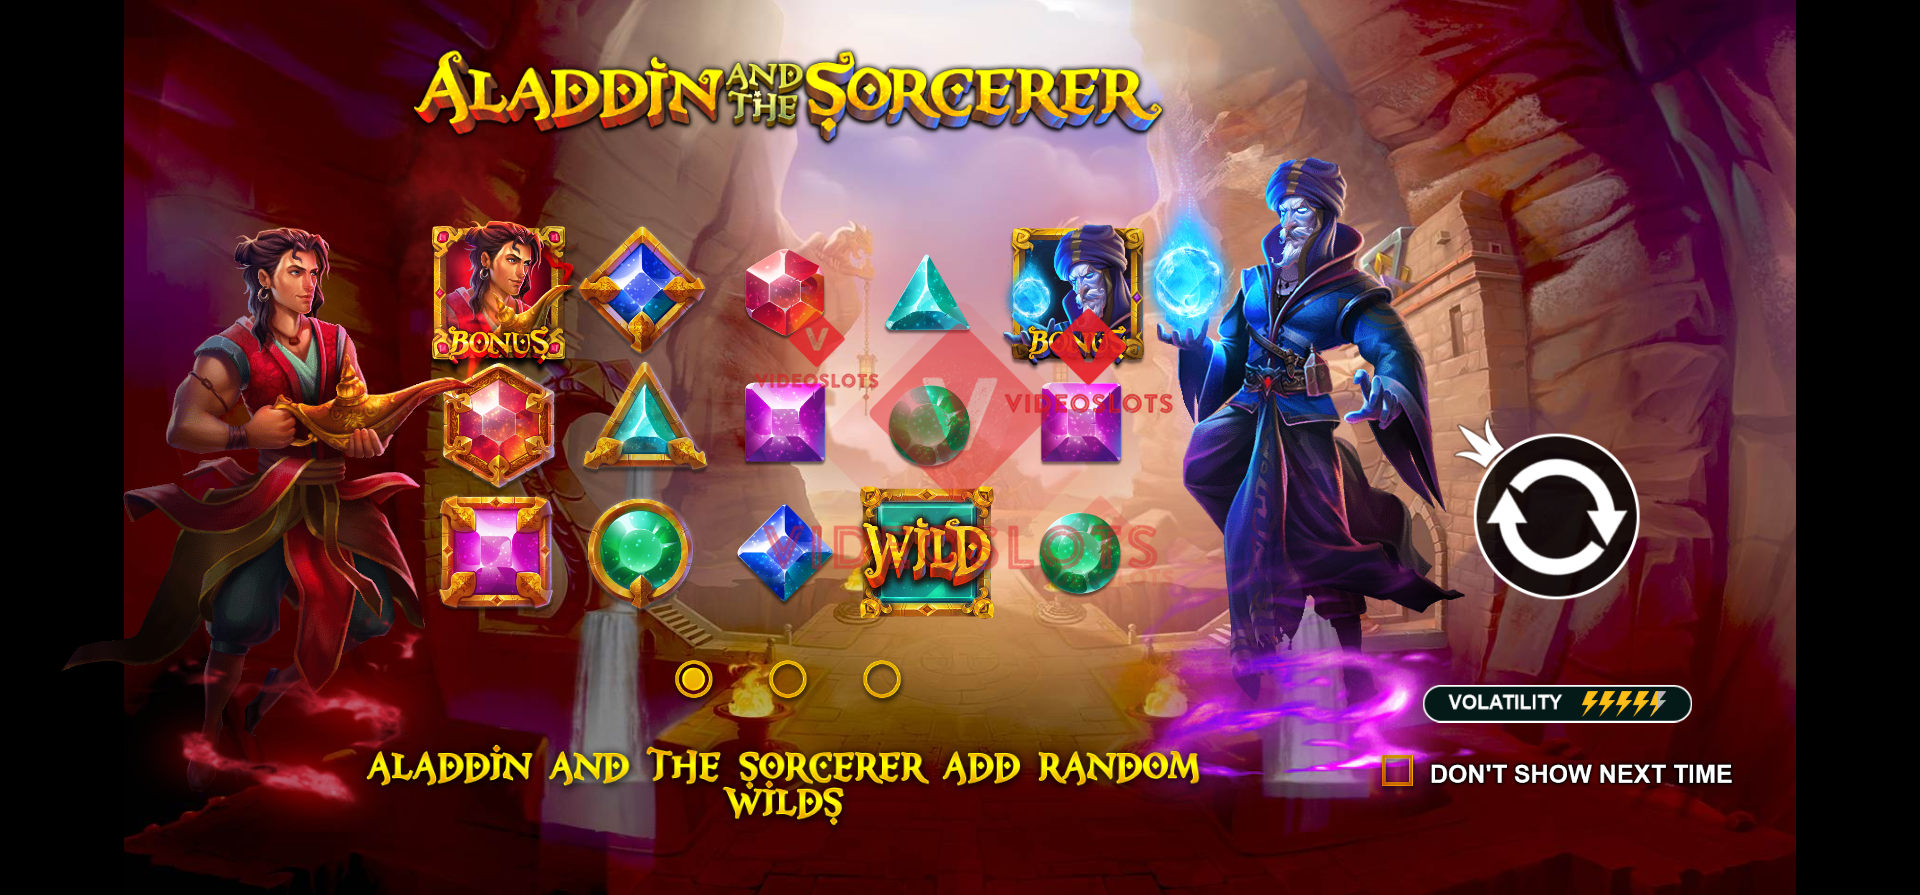 Game intro for Aladdin and The Sorcerer slot by Pragmatic Play